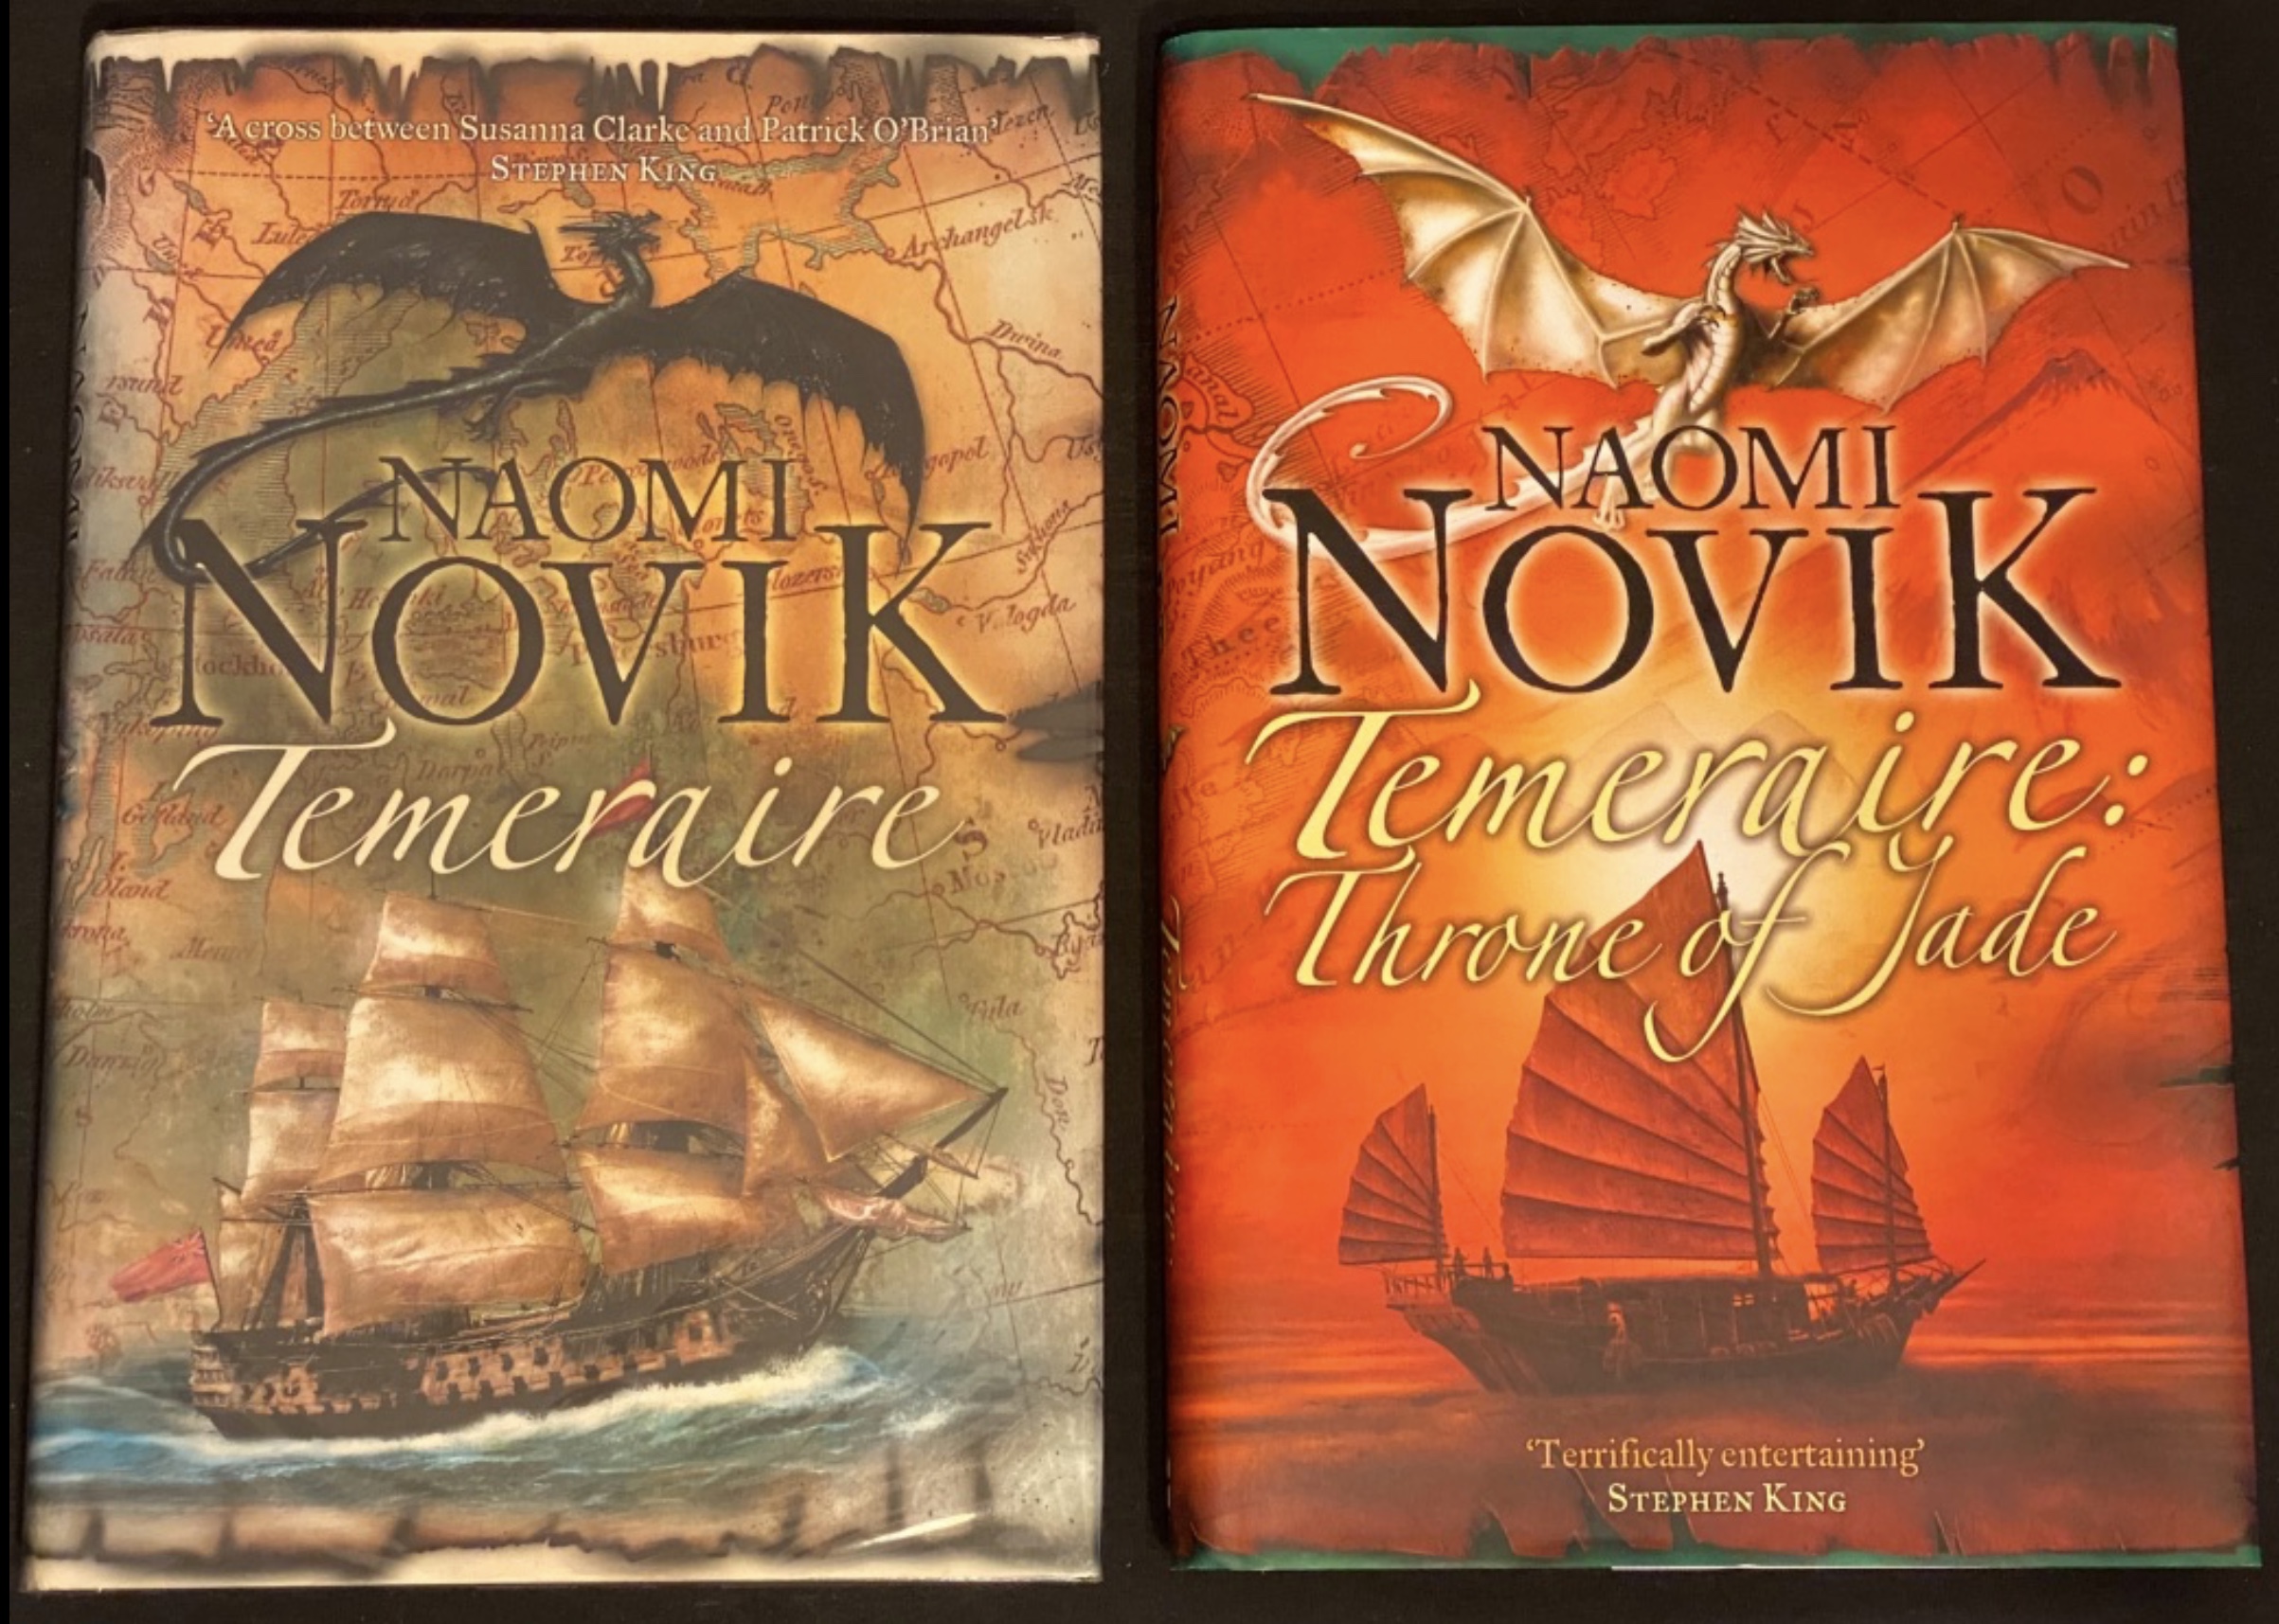 Naomi Novik - Temeraire -and Temeraire: The Throne of Jade - Both 1st/1st UK HB - Voyager